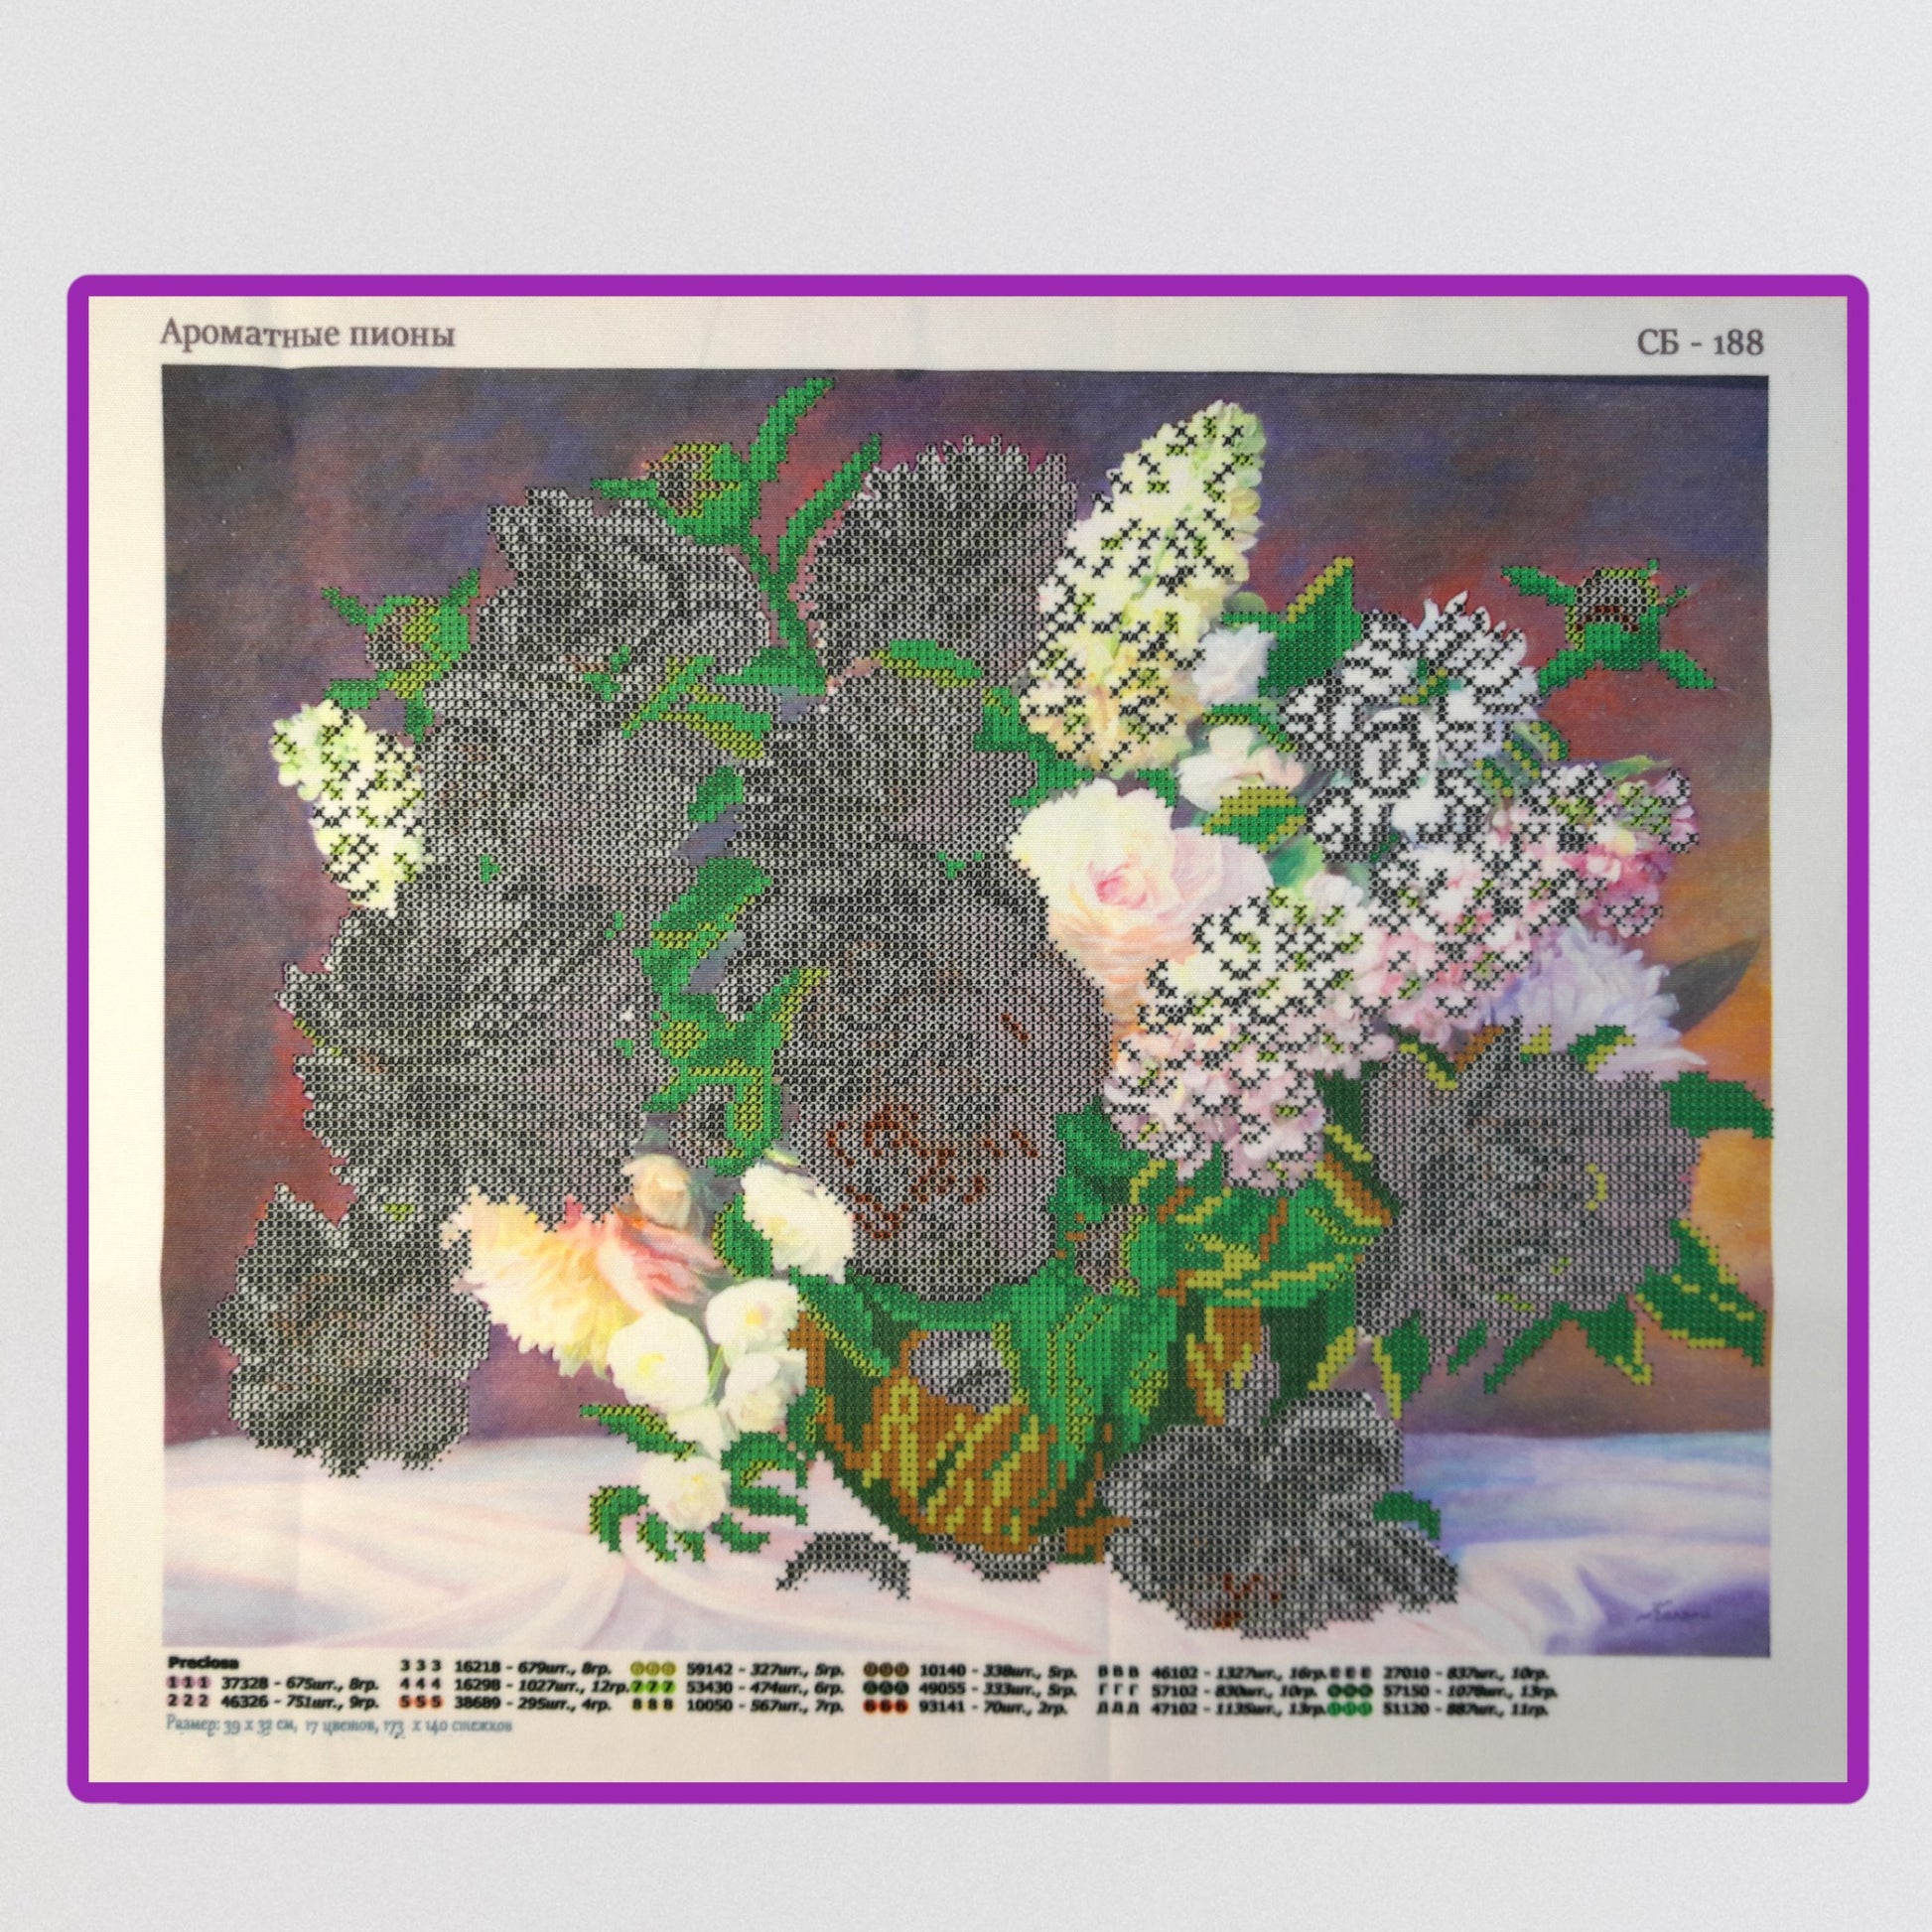 DIY Bead embroidery kit  ''Fragrant peonies". Size: 15.4 - 12.6 in (39 - 32cm) - VadymShop